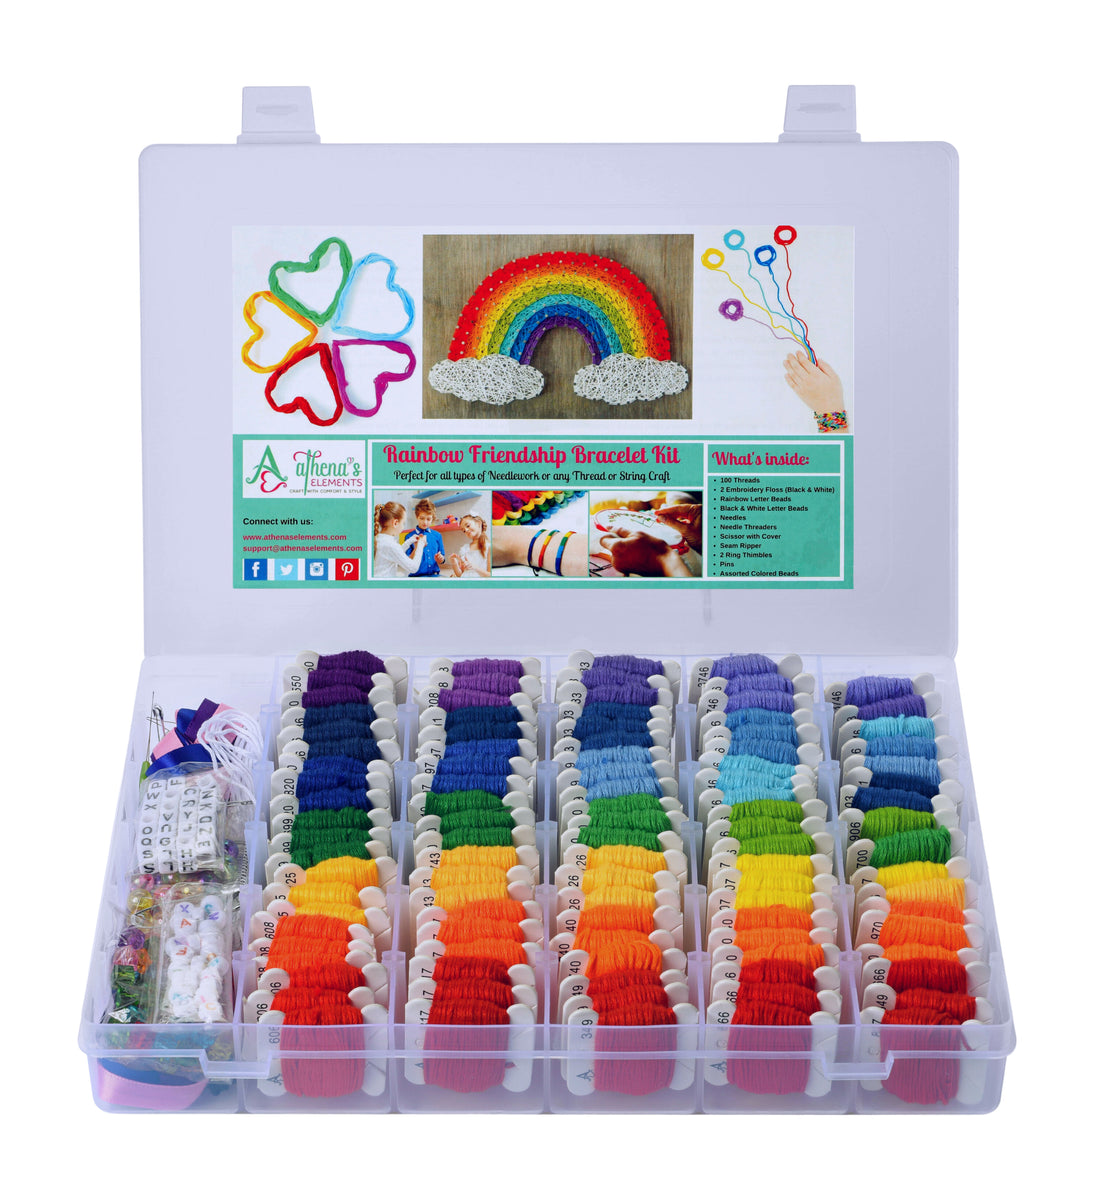 Athena's Elements Embroidery Floss Friendship Bracelet String Kit - 276pcs  Embroidery Thread and Accessories - Colors are Labeled